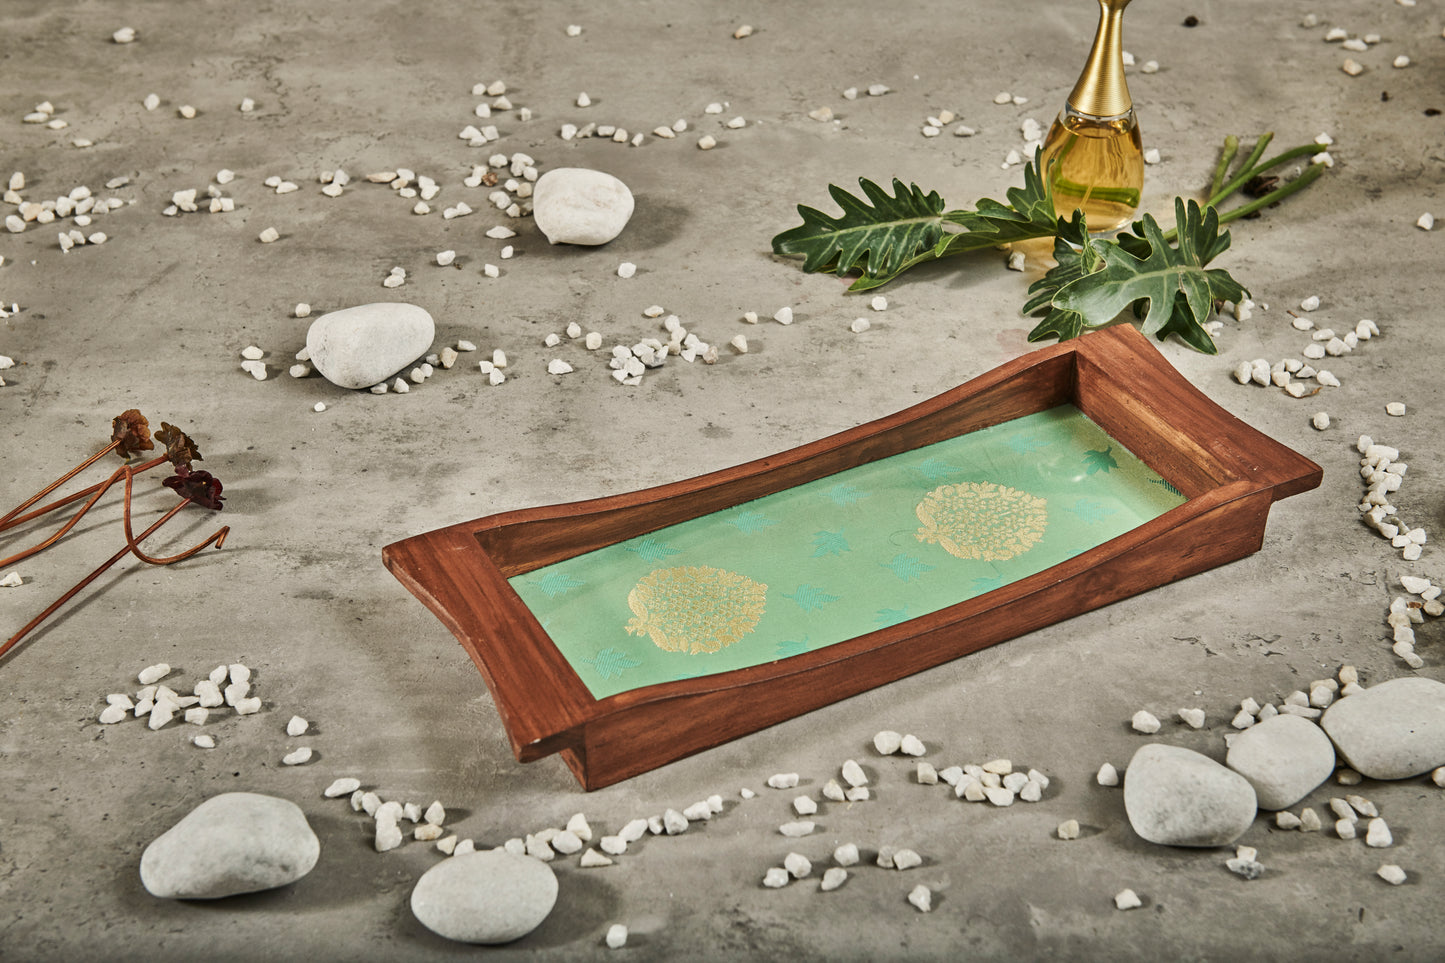 A Tiny Mistake Elegant Green Brocade Boat Shaped Teak Serving Tray, Tray for Serving Tea and Snacks, 35 x 15 x 4 cm